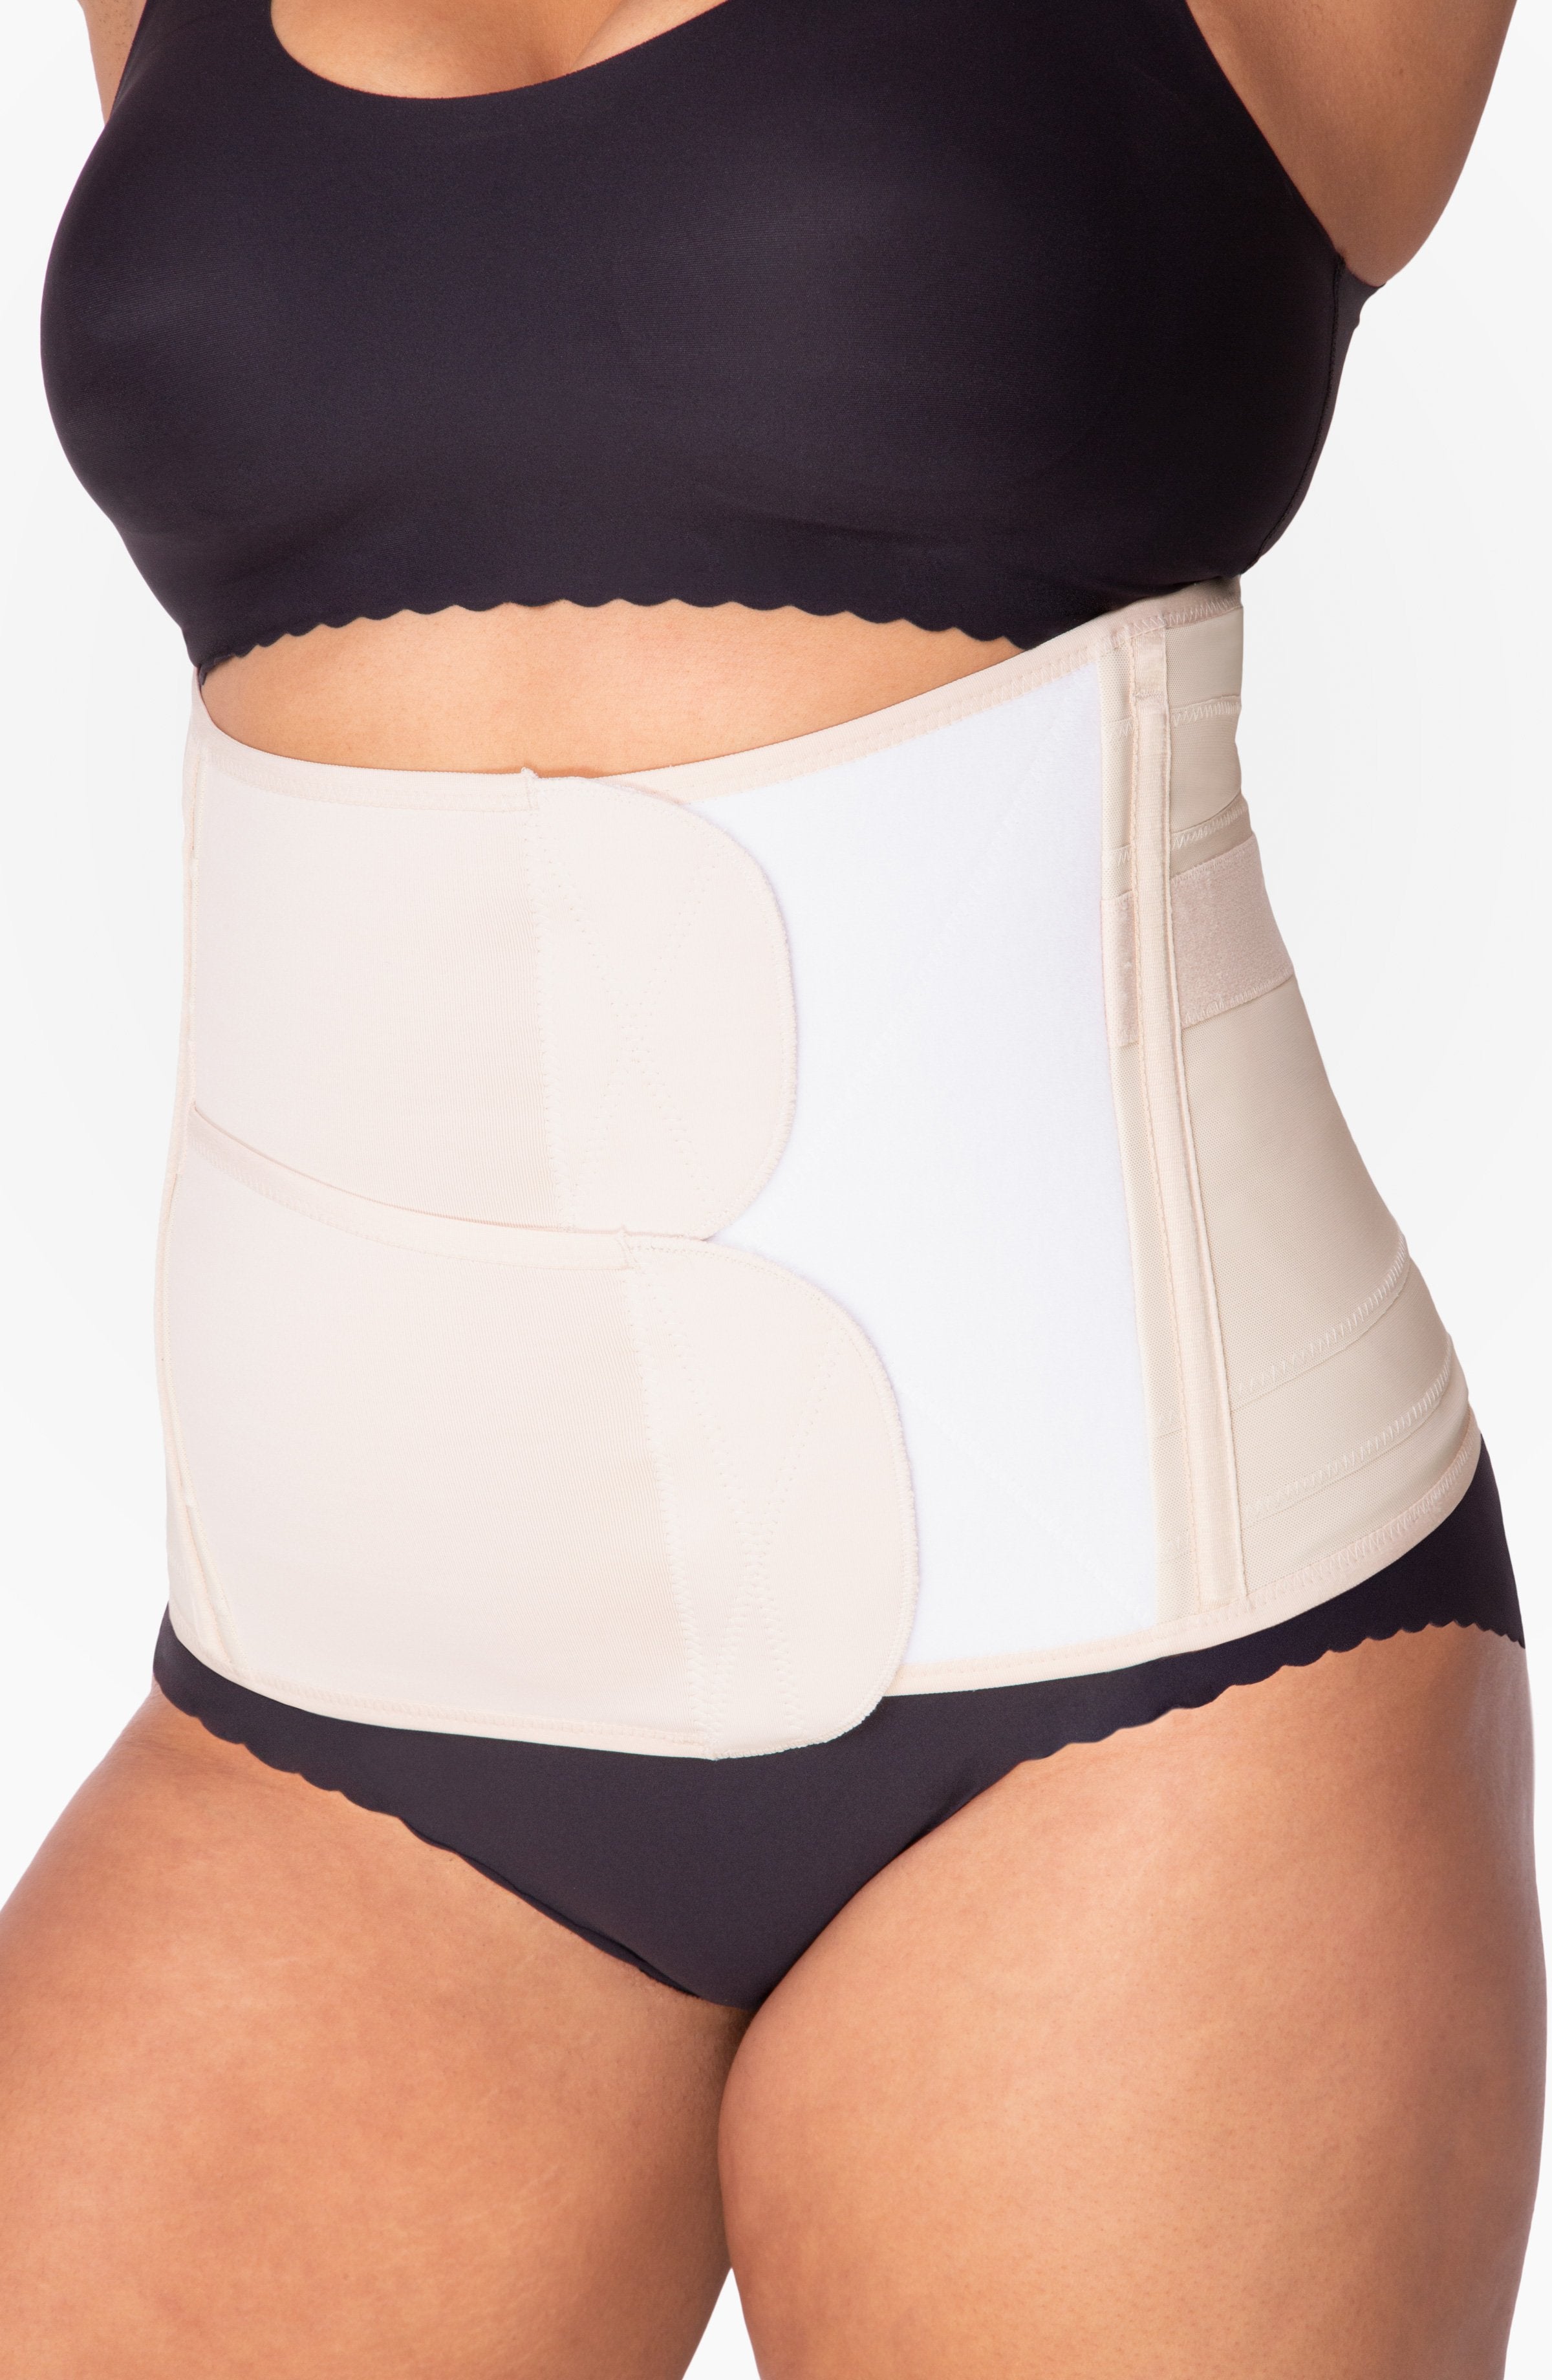 Belly Bandit - Postpartum Sculpting Girdle - X-Small, Nude